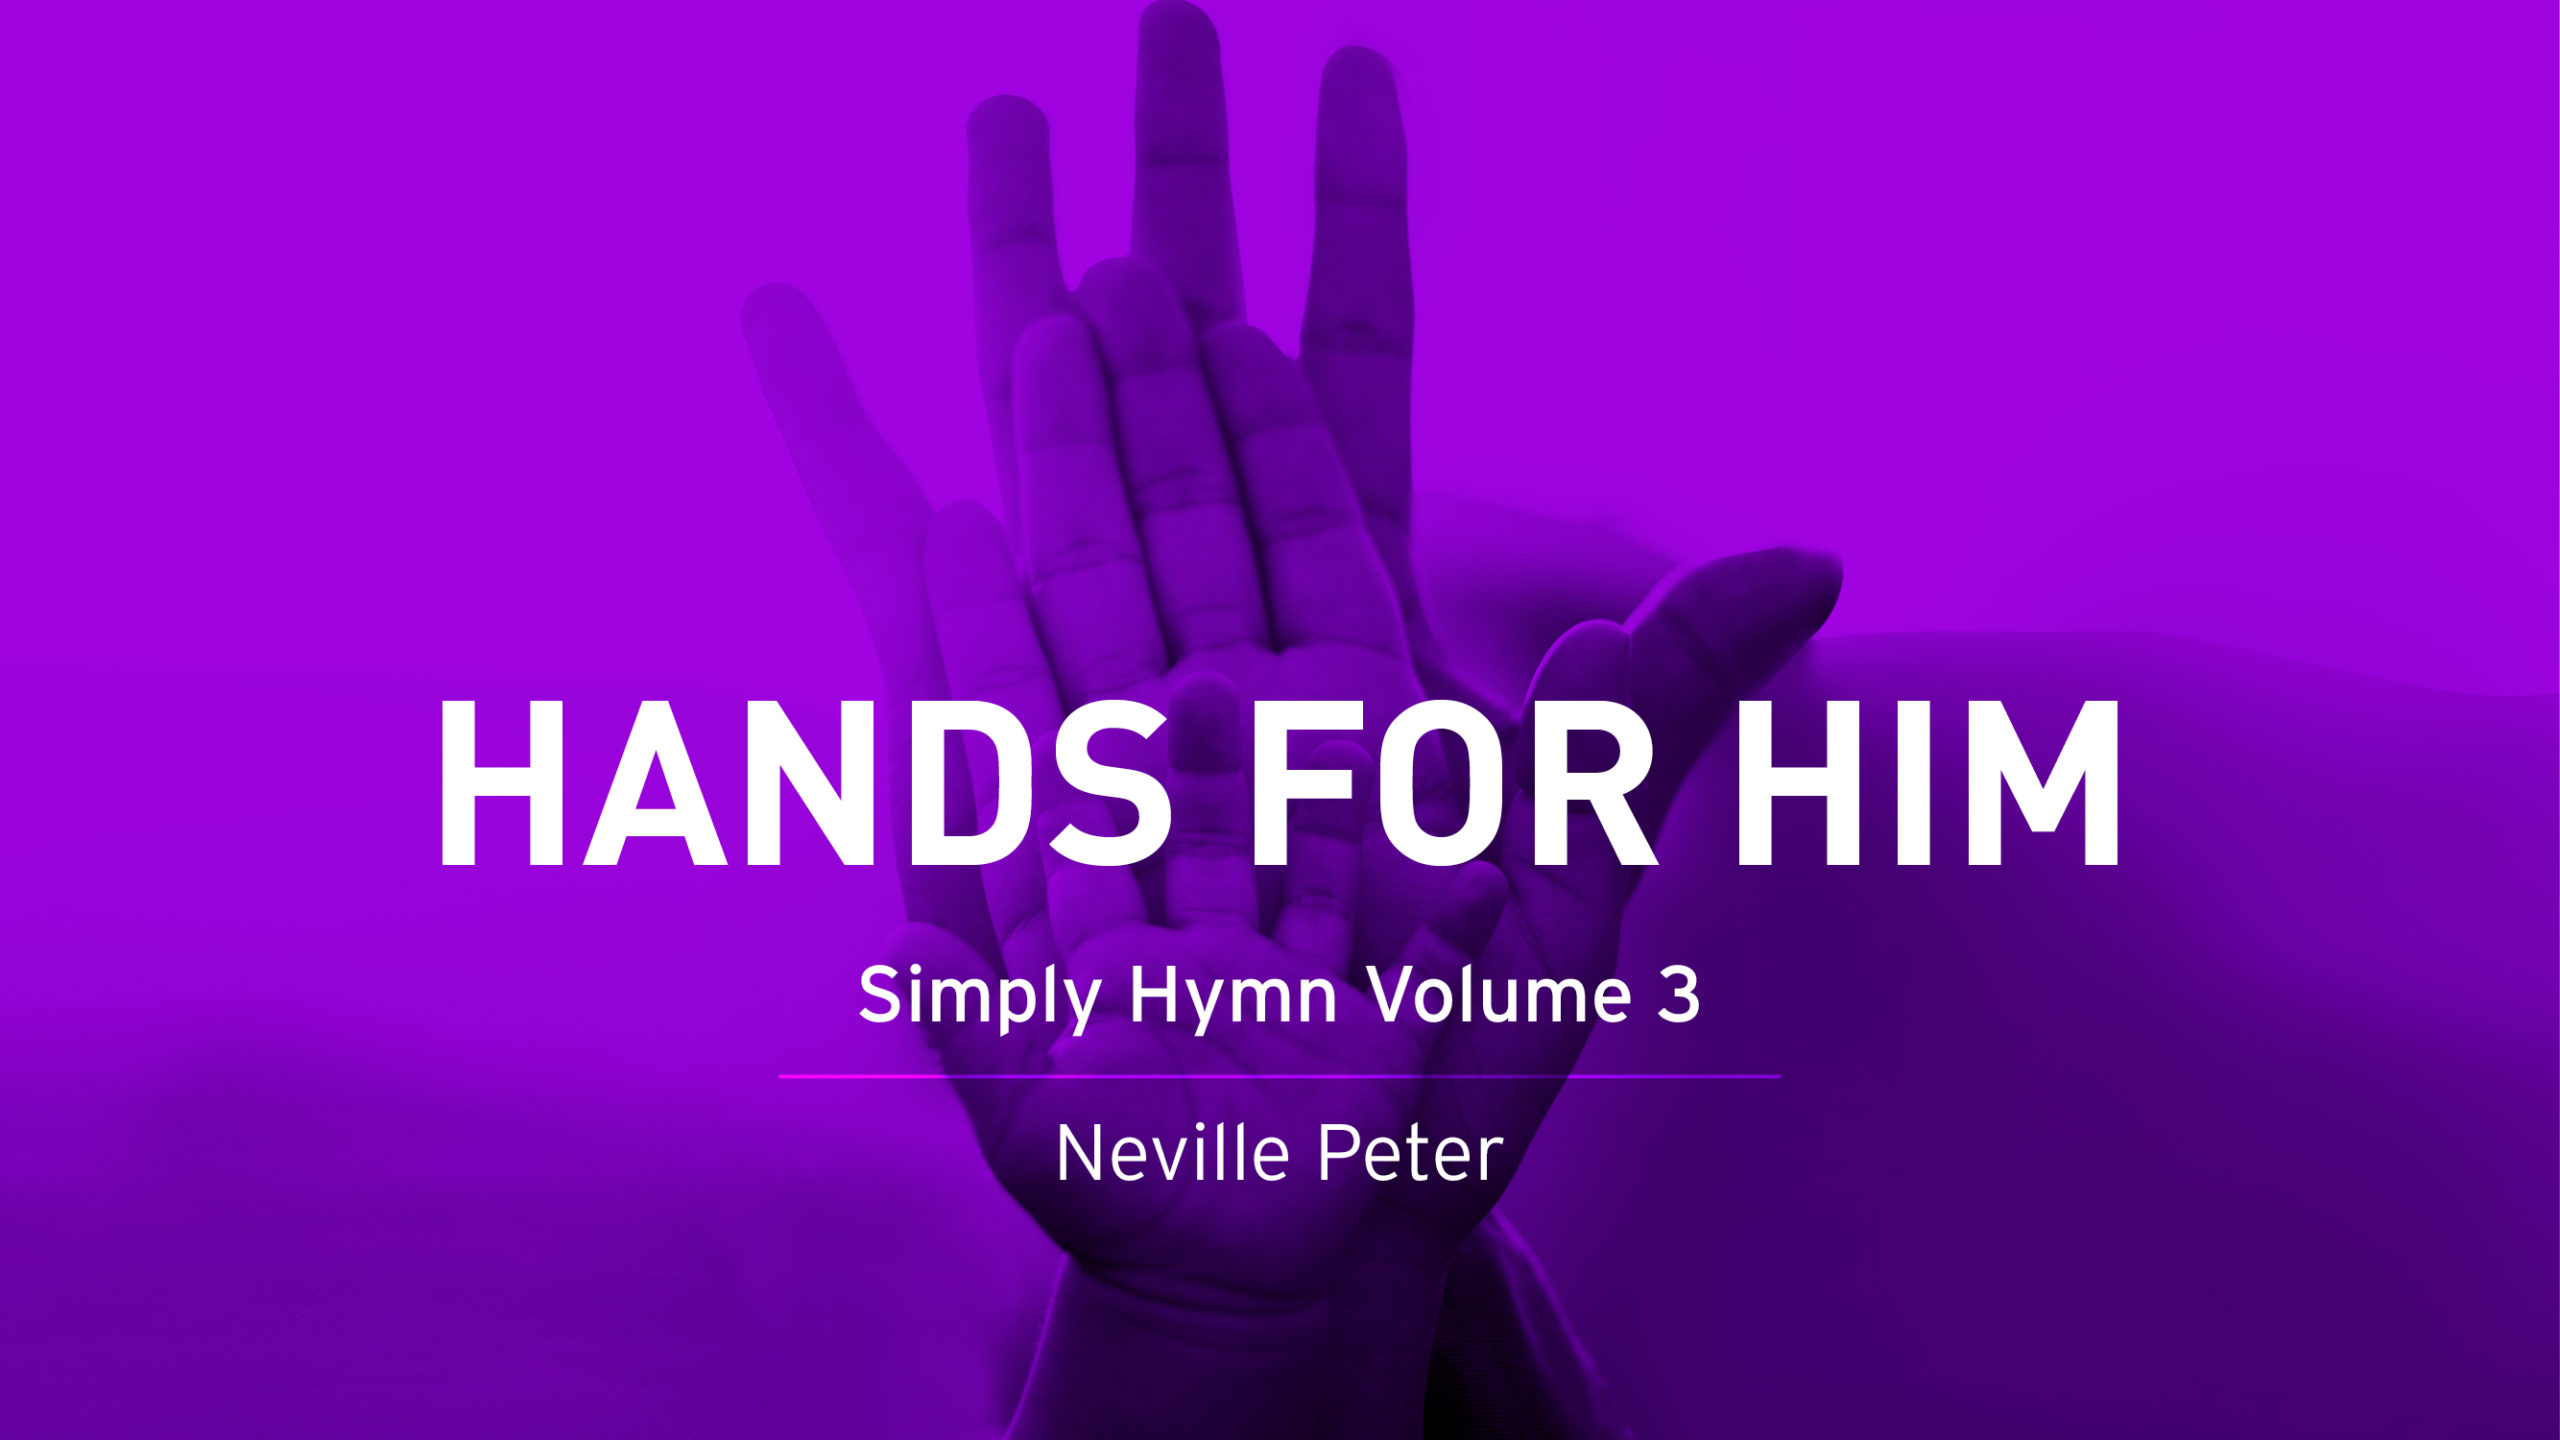 Artwork for the album Simply Hymn Volume 3 Hands For Him